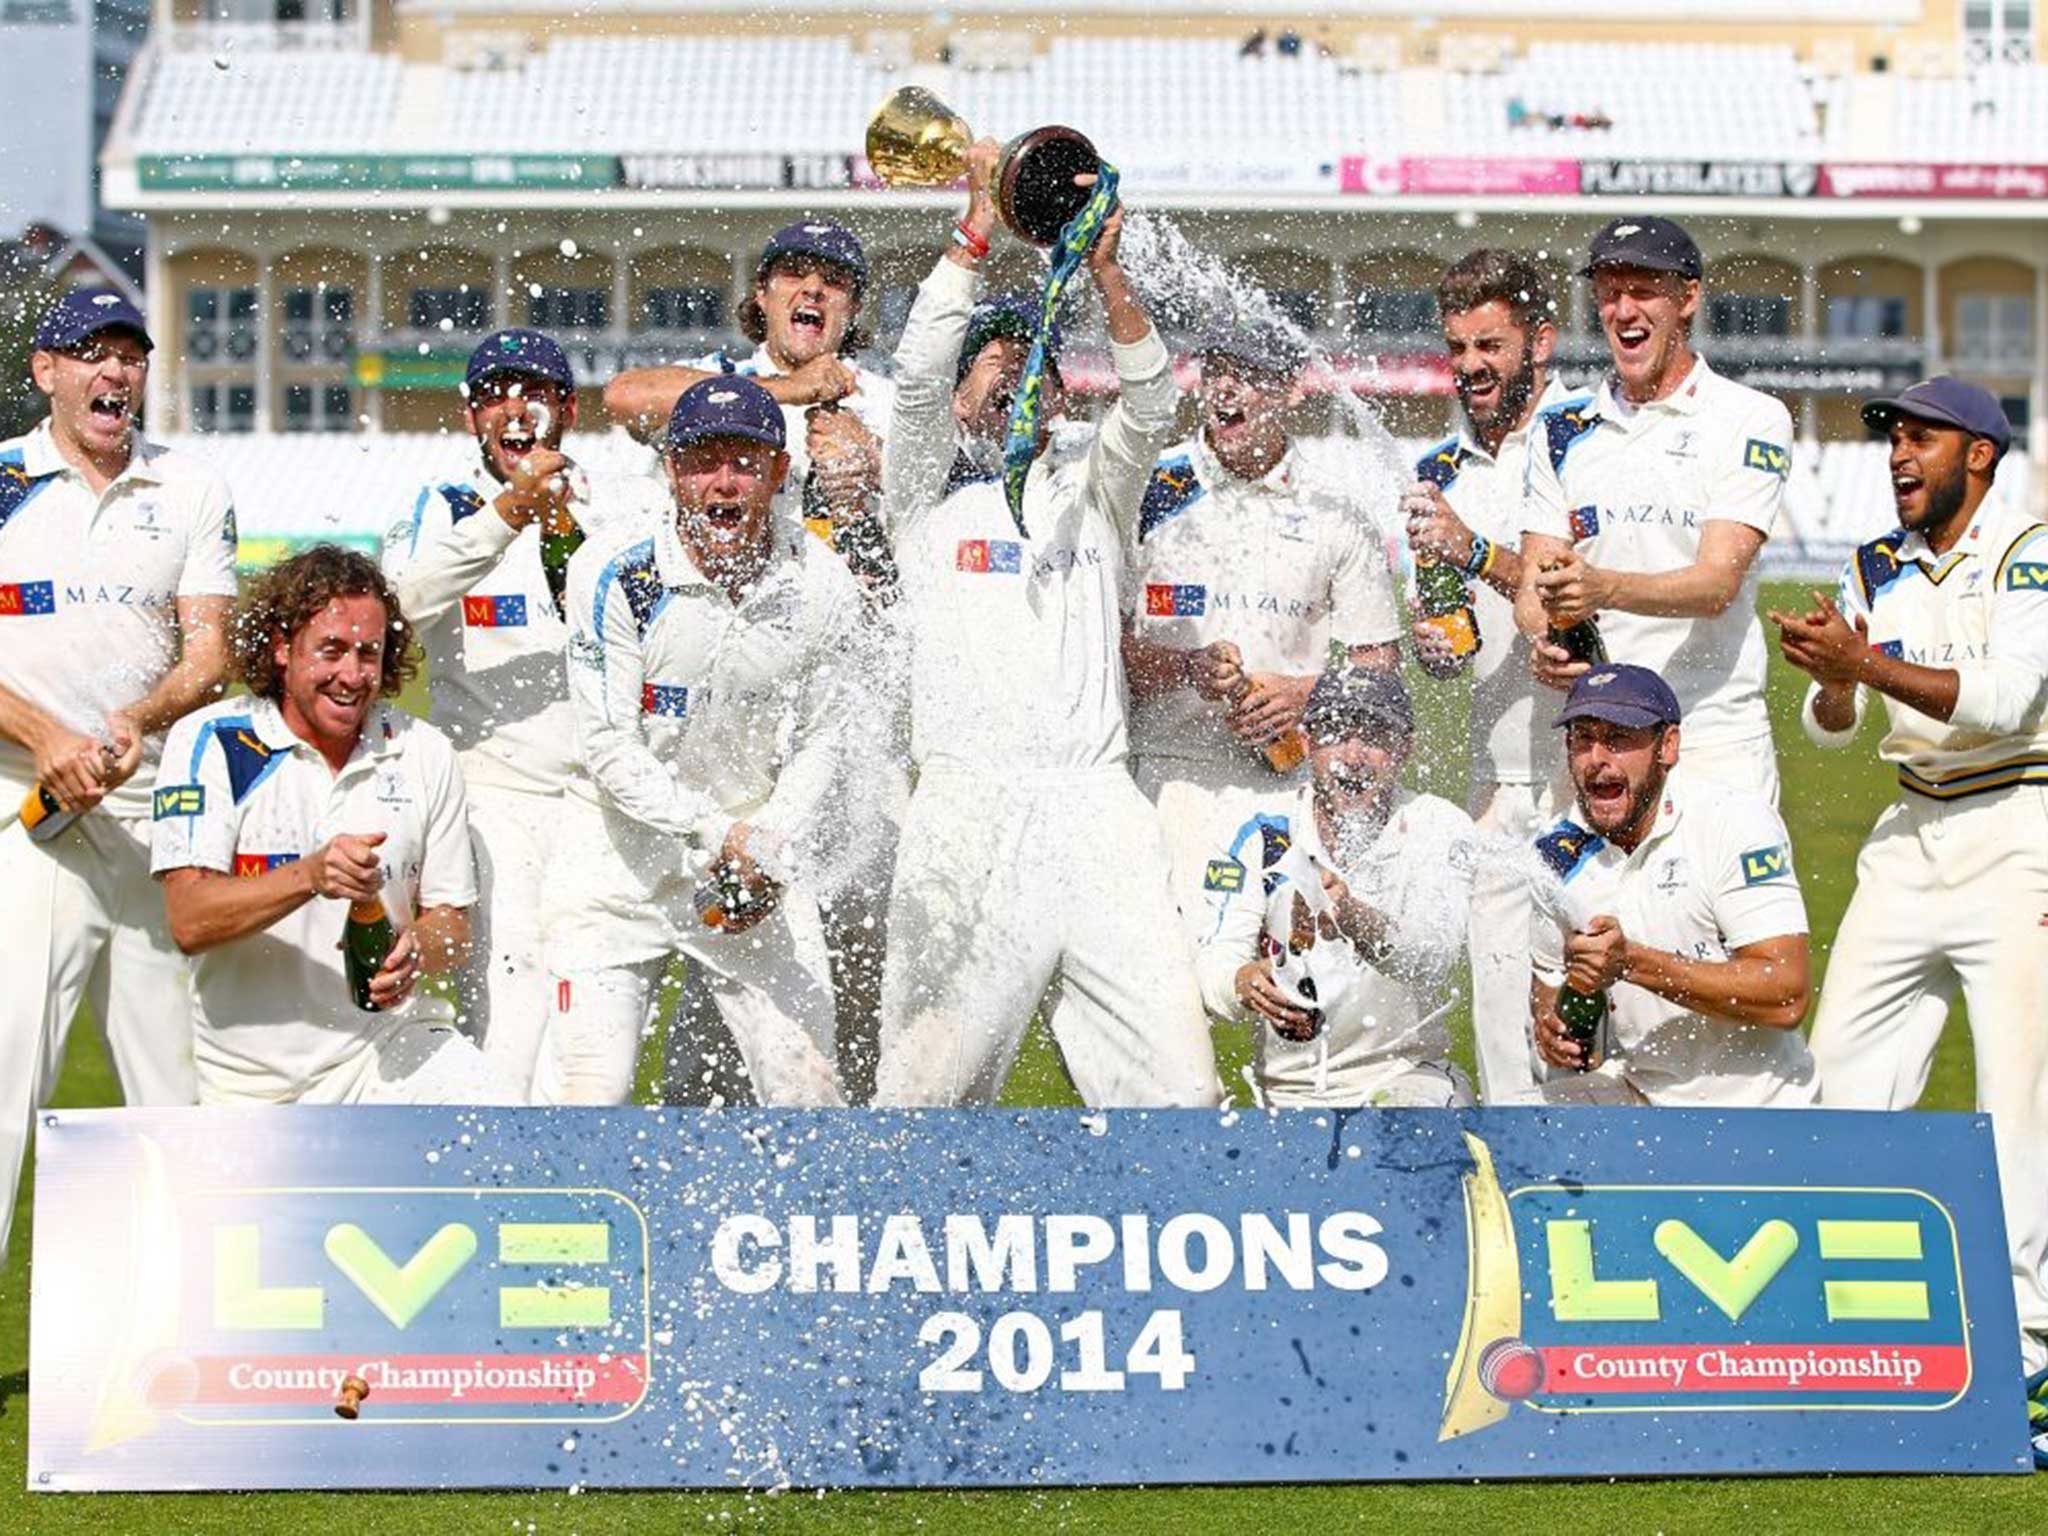 Yorkshire celebrate winning last year’s County Championship First Division title